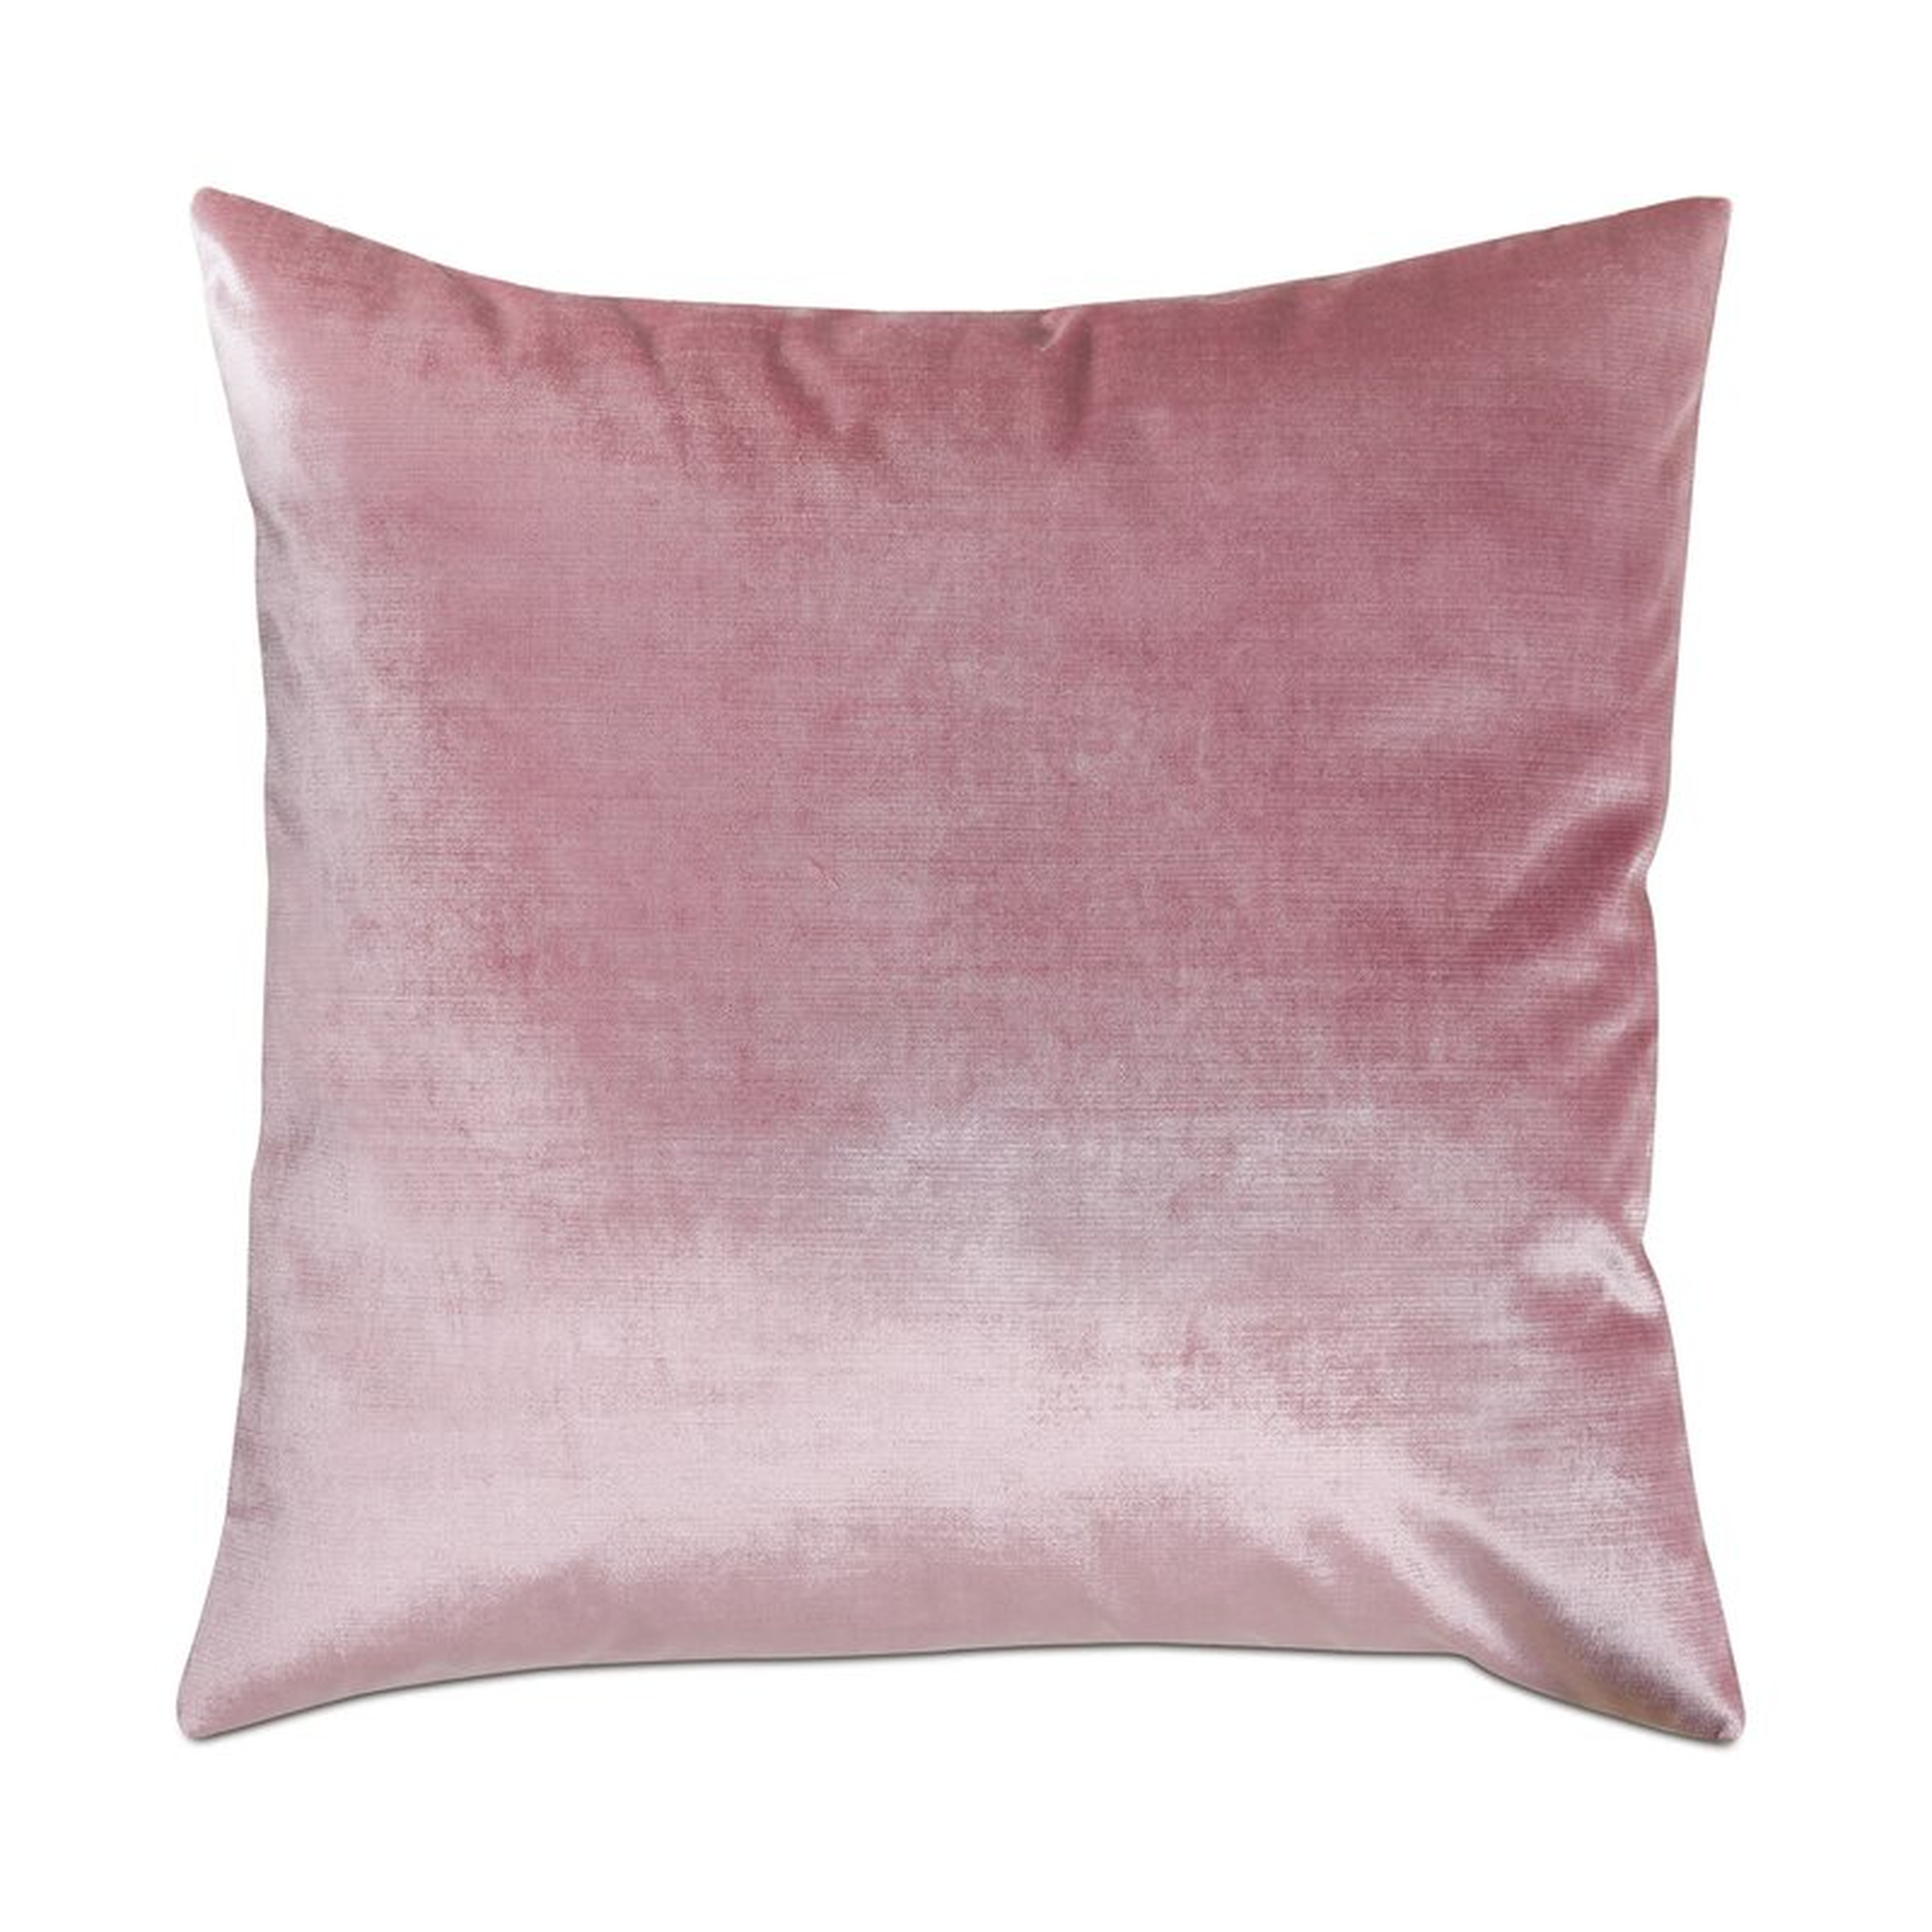 Eastern Accents Cora Velvet Throw Pillow Color: Rose Pink - Perigold